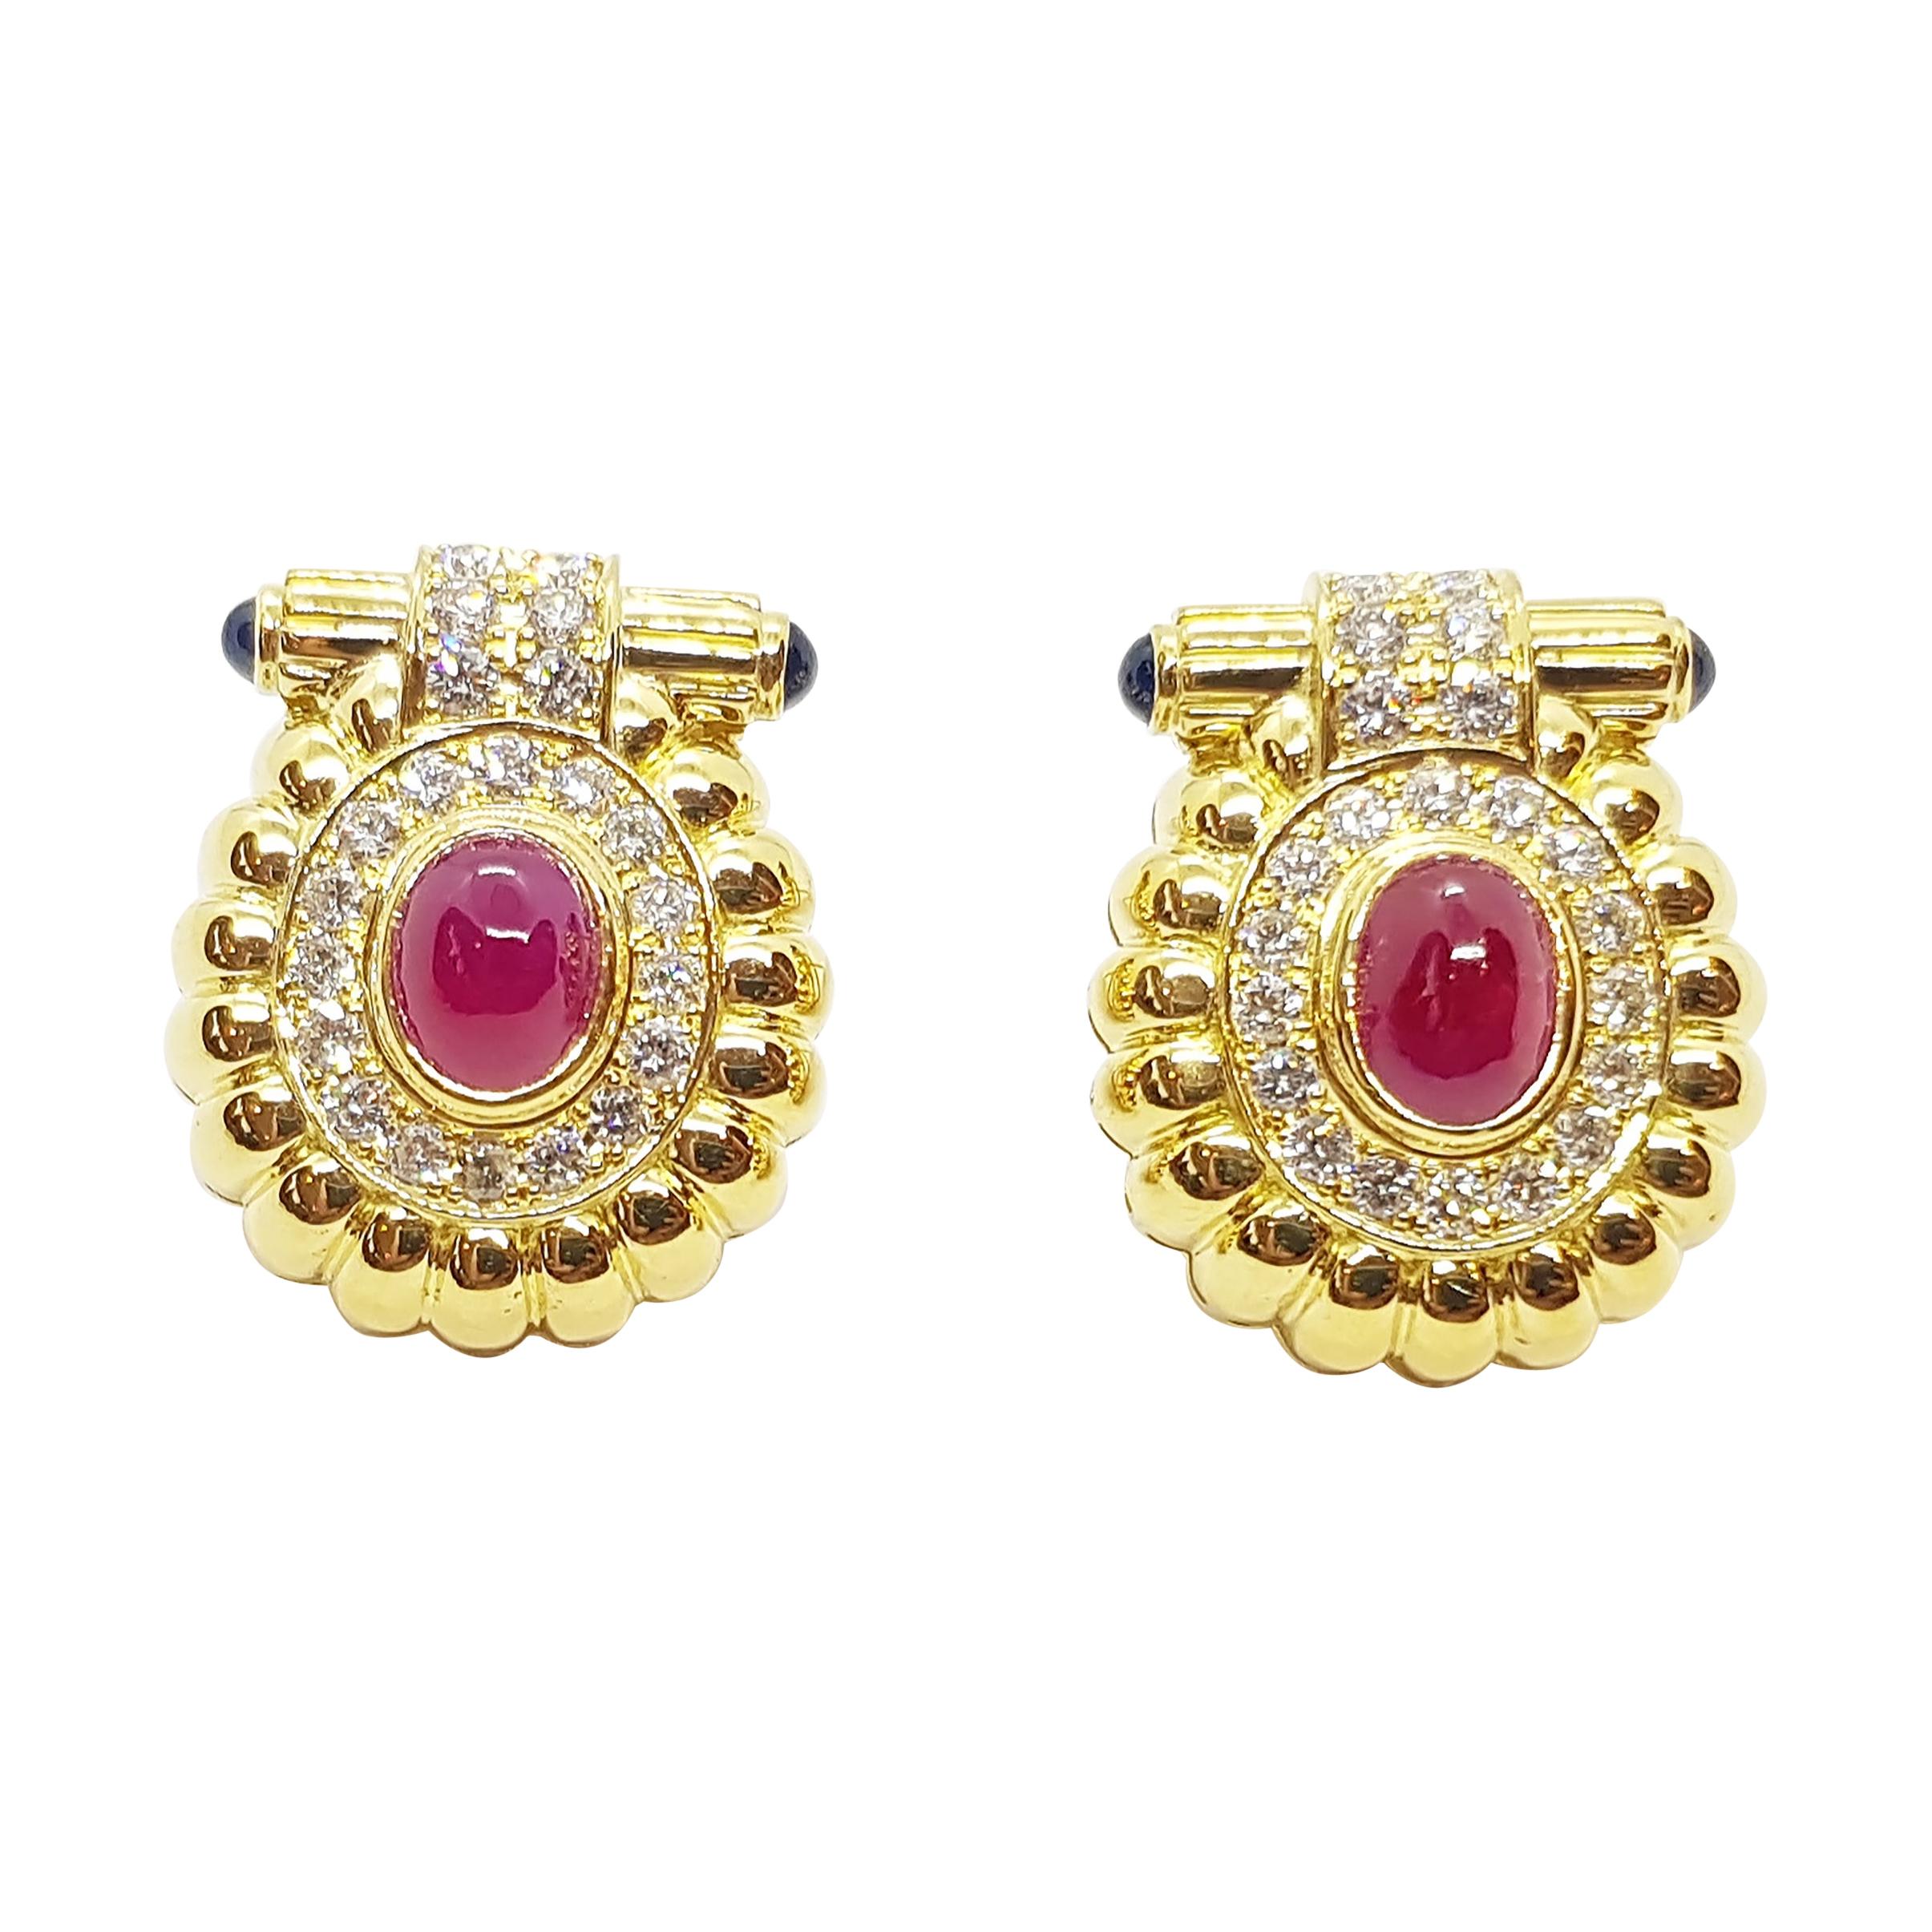 Cabochon Ruby with Diamond and Cabochon Blue Sapphire Earrings in 18 Karat Gold